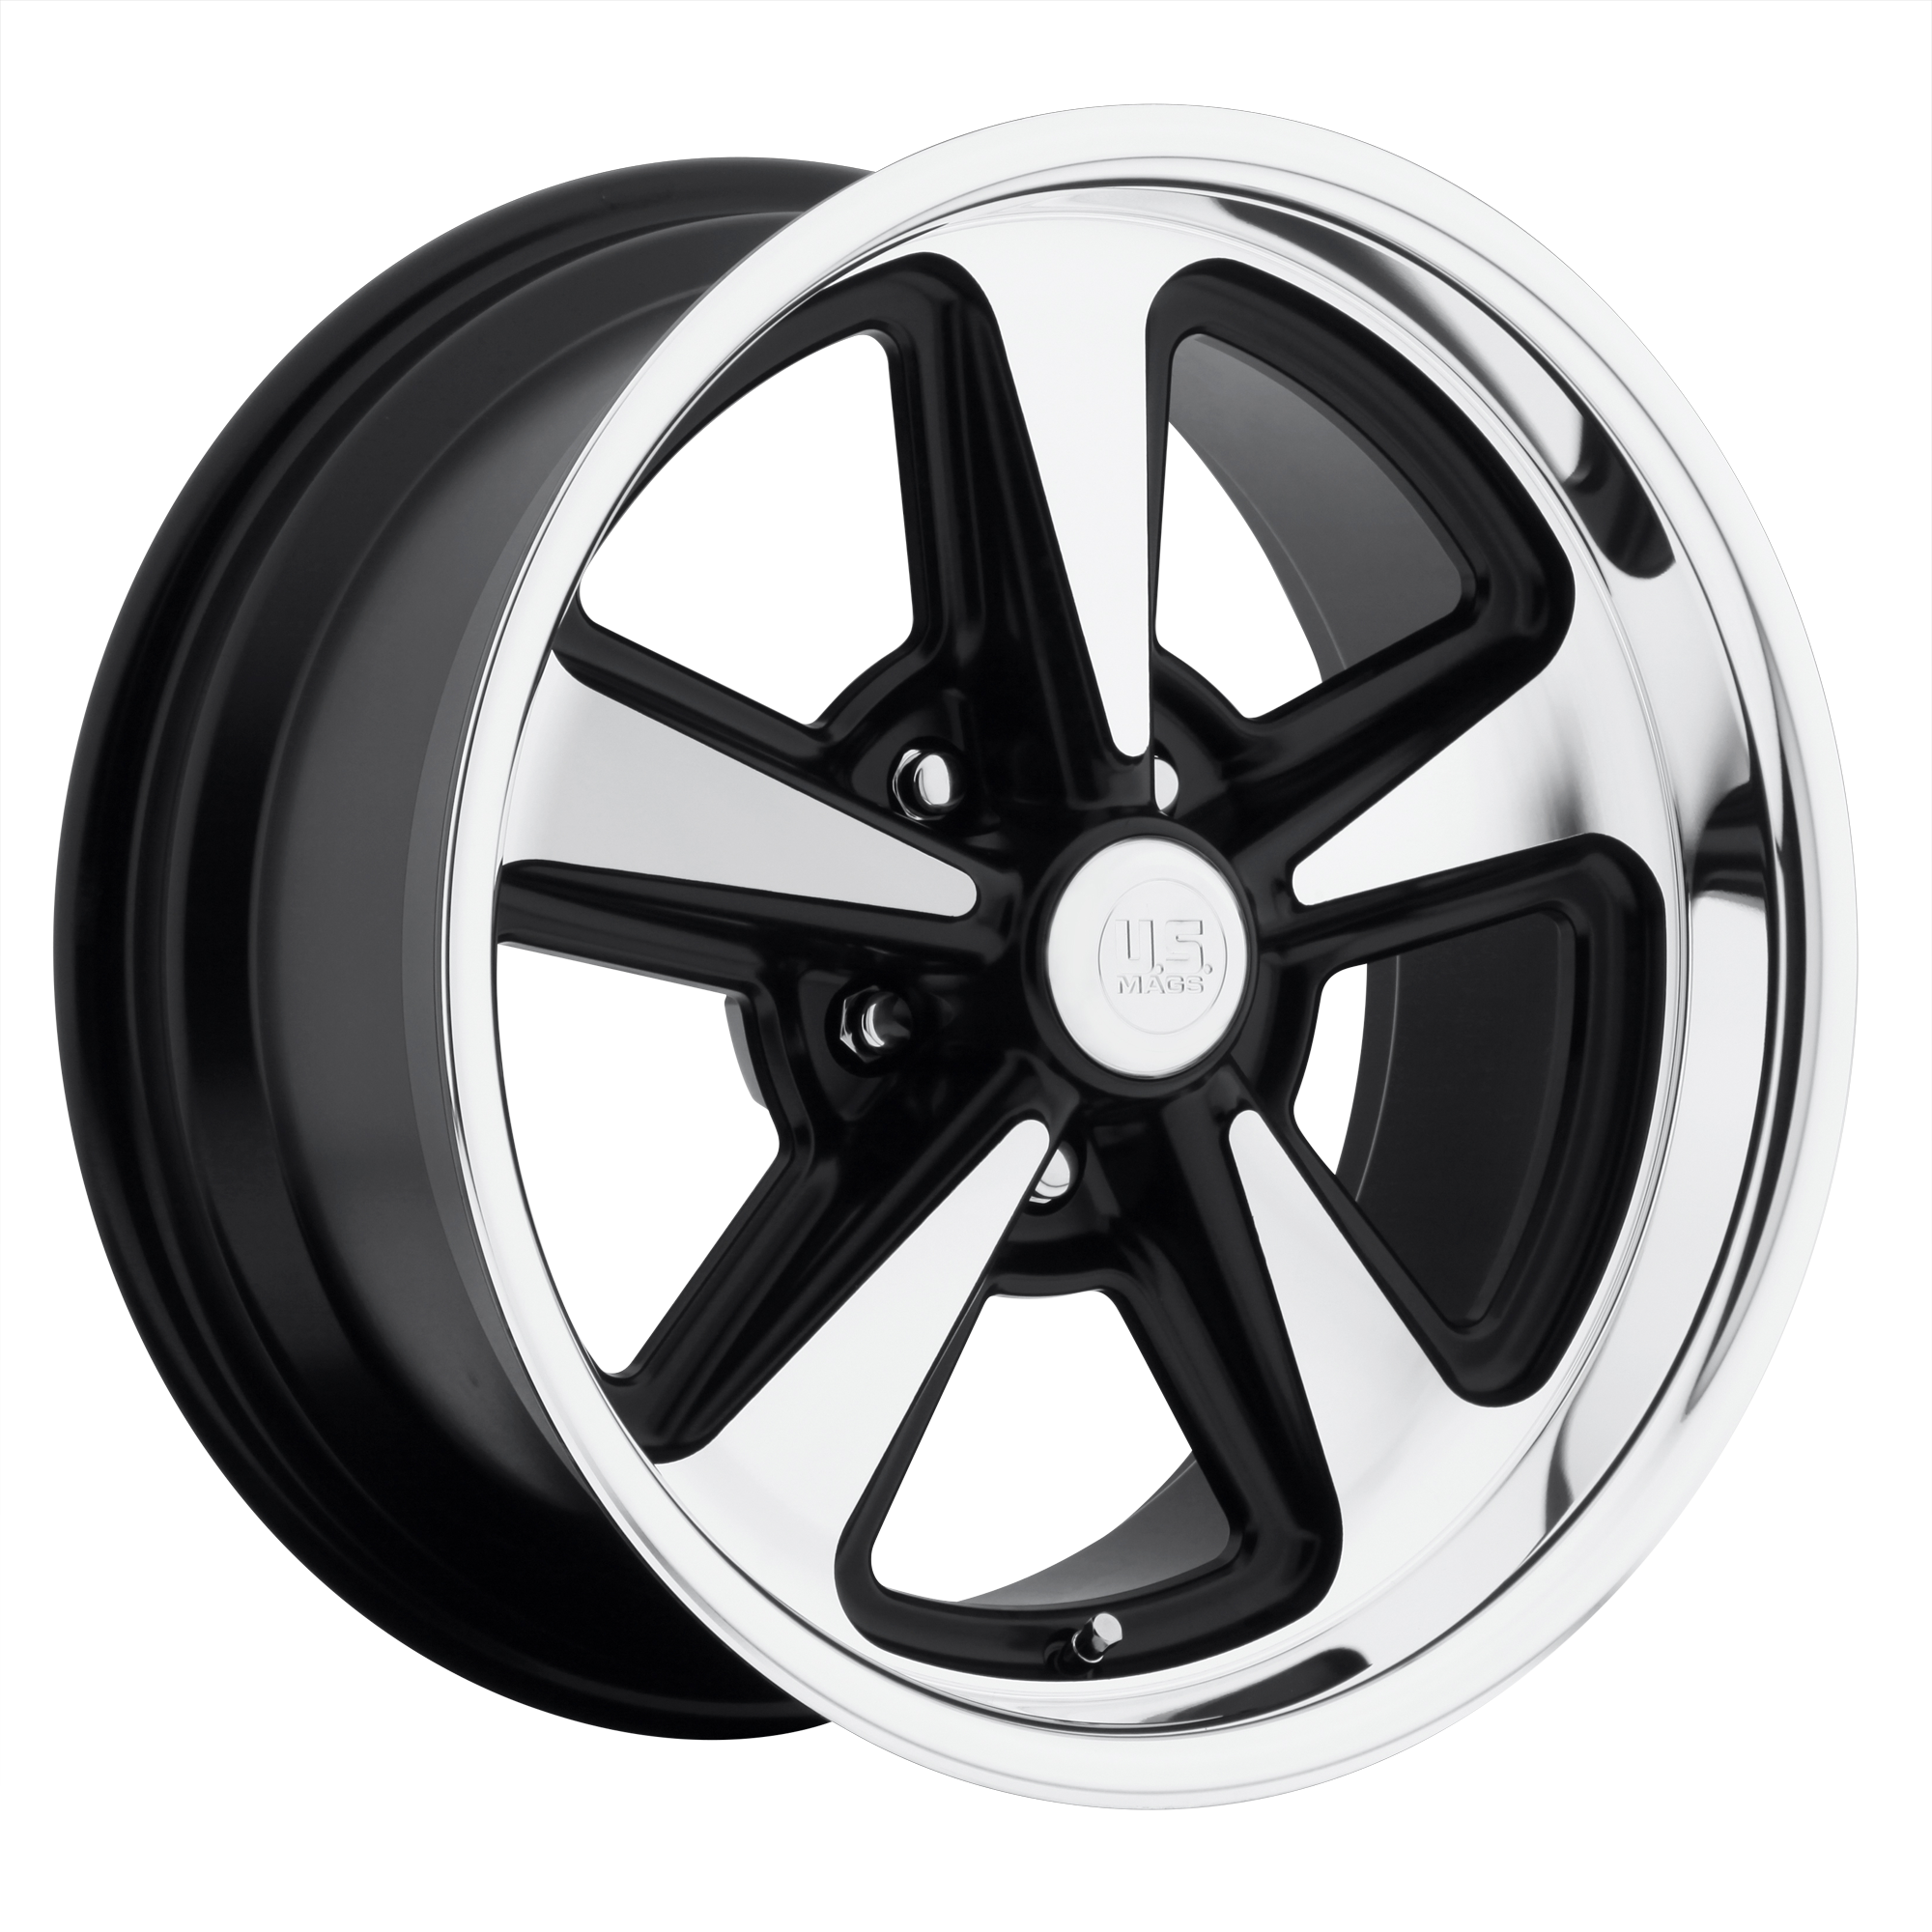 BANDIT 17x9 5x120.65 MATTE BLACK MACHINED (8 mm) - Tires and Engine Performance